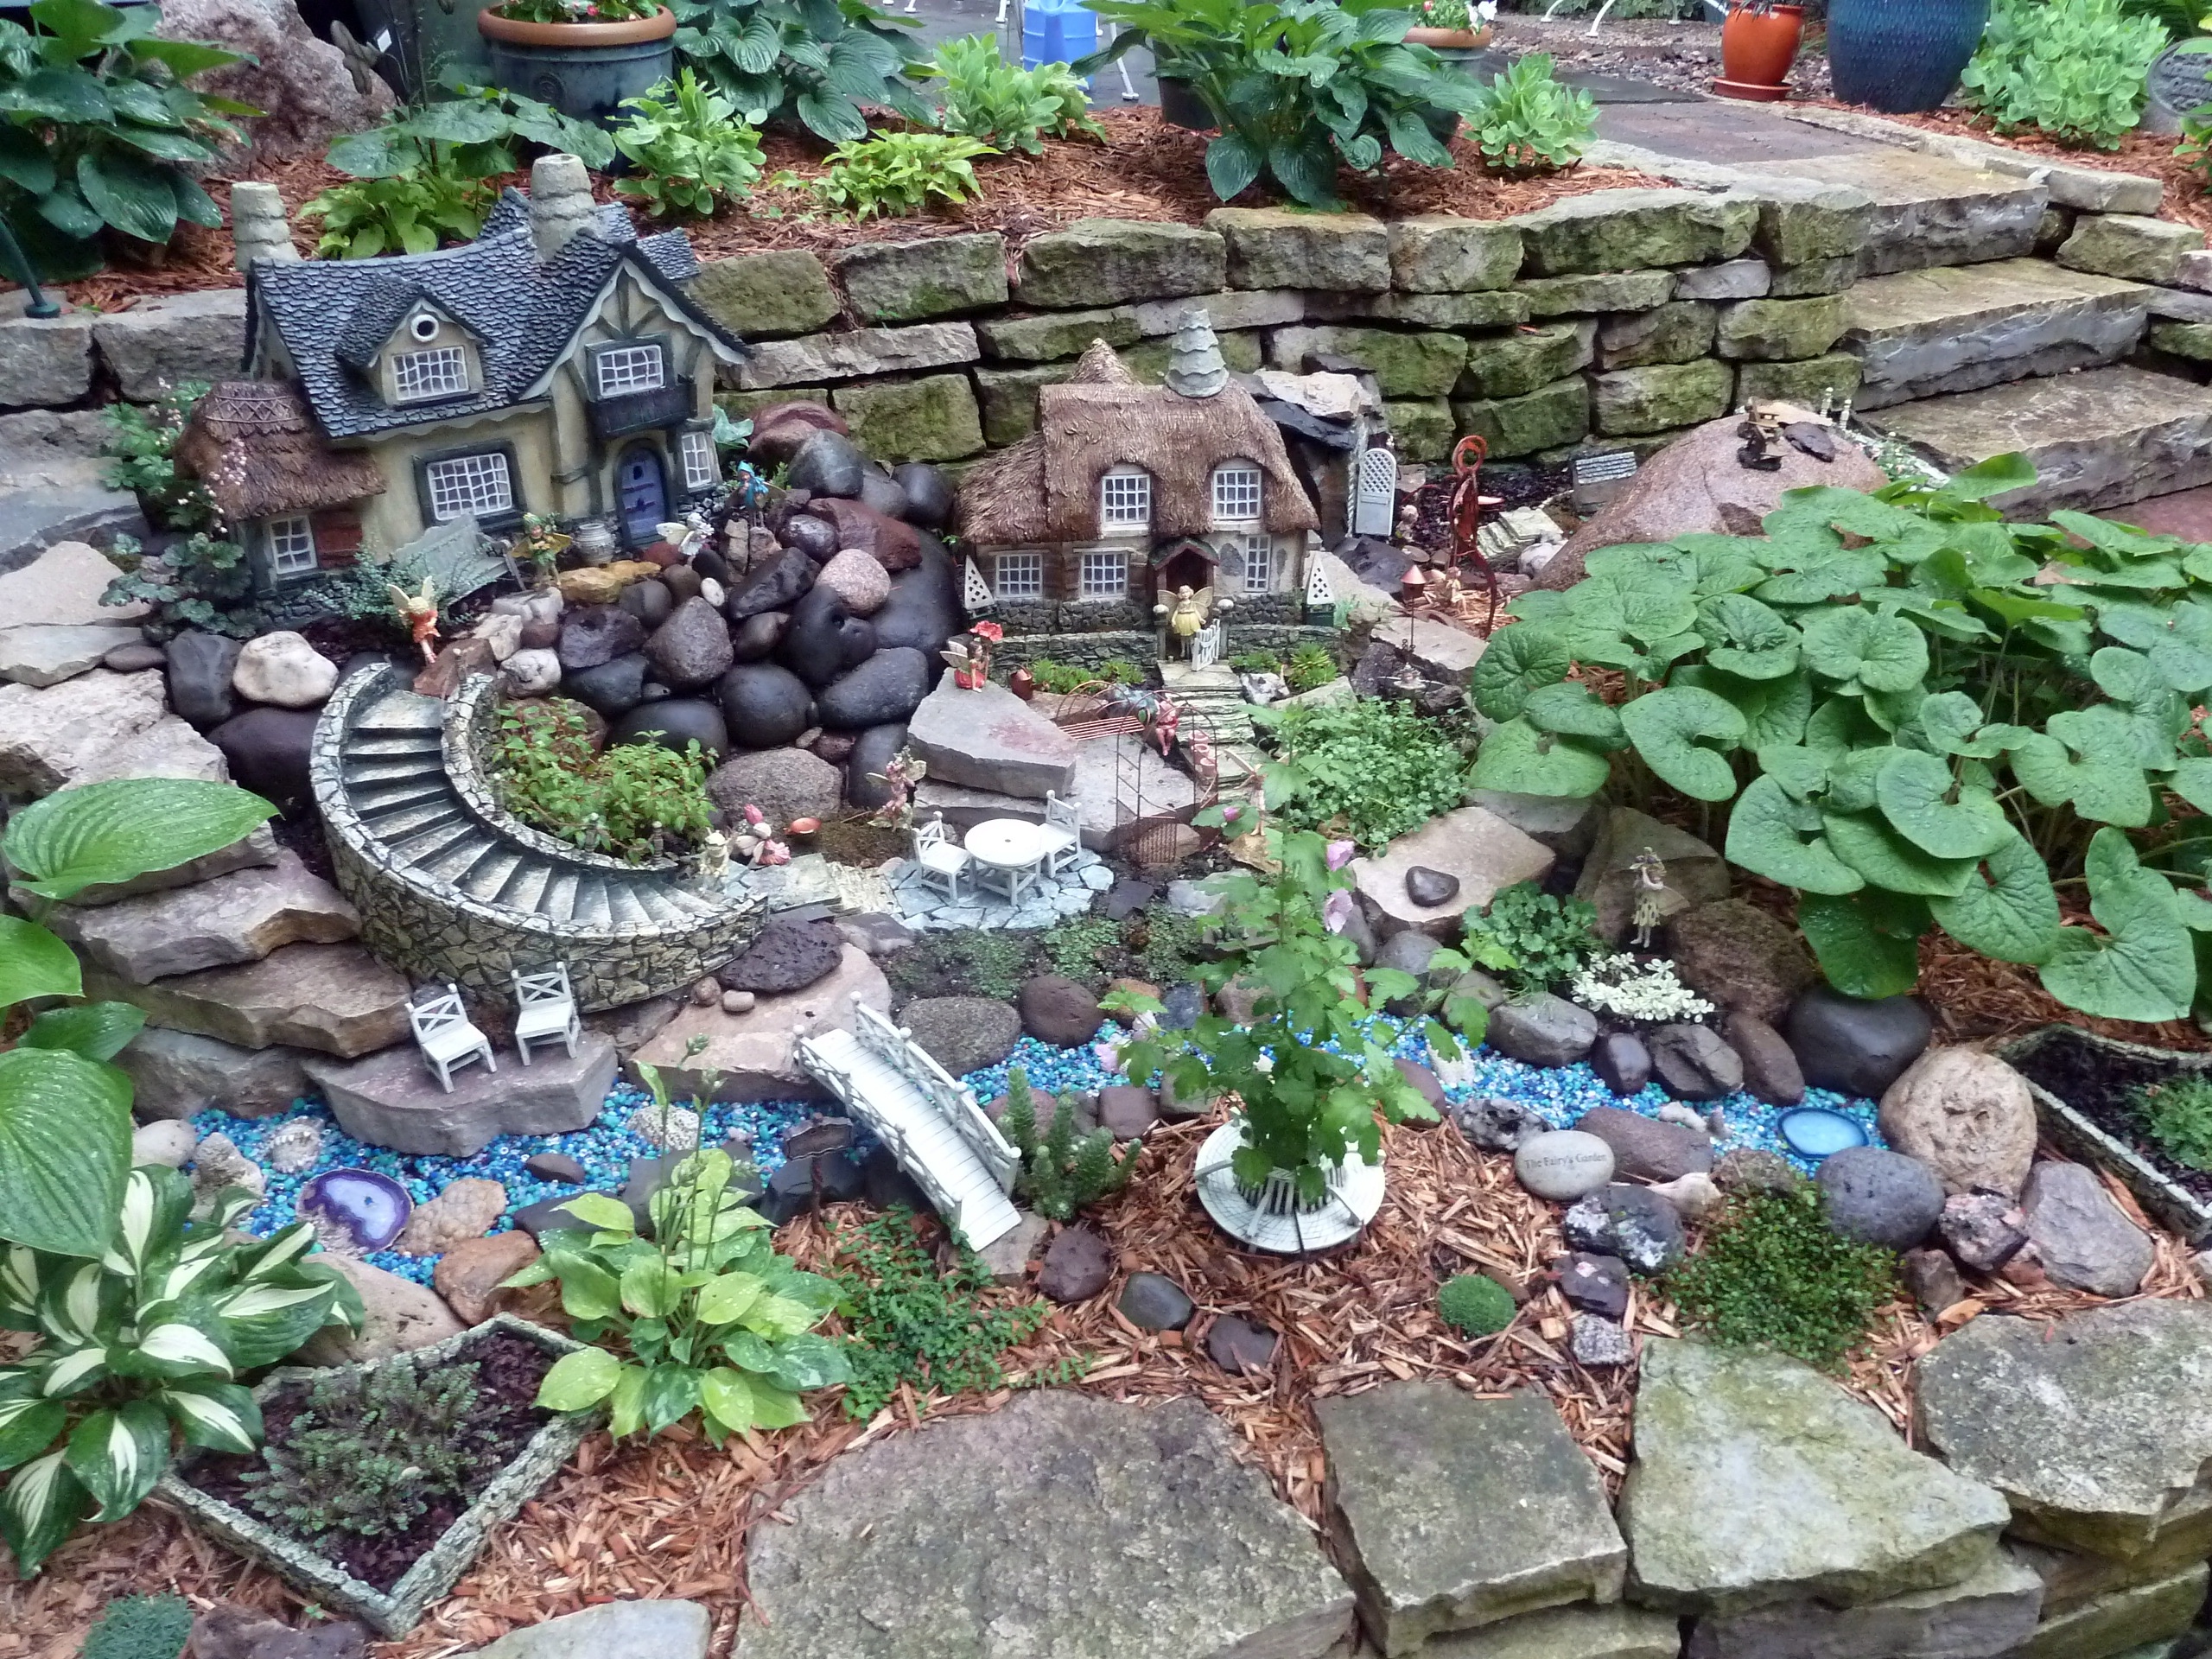 elaborate garden set up, including two fairy houses, a tiny winding staircase, several figurines and accessories, how to make a fairy garden, different kinds of plants 